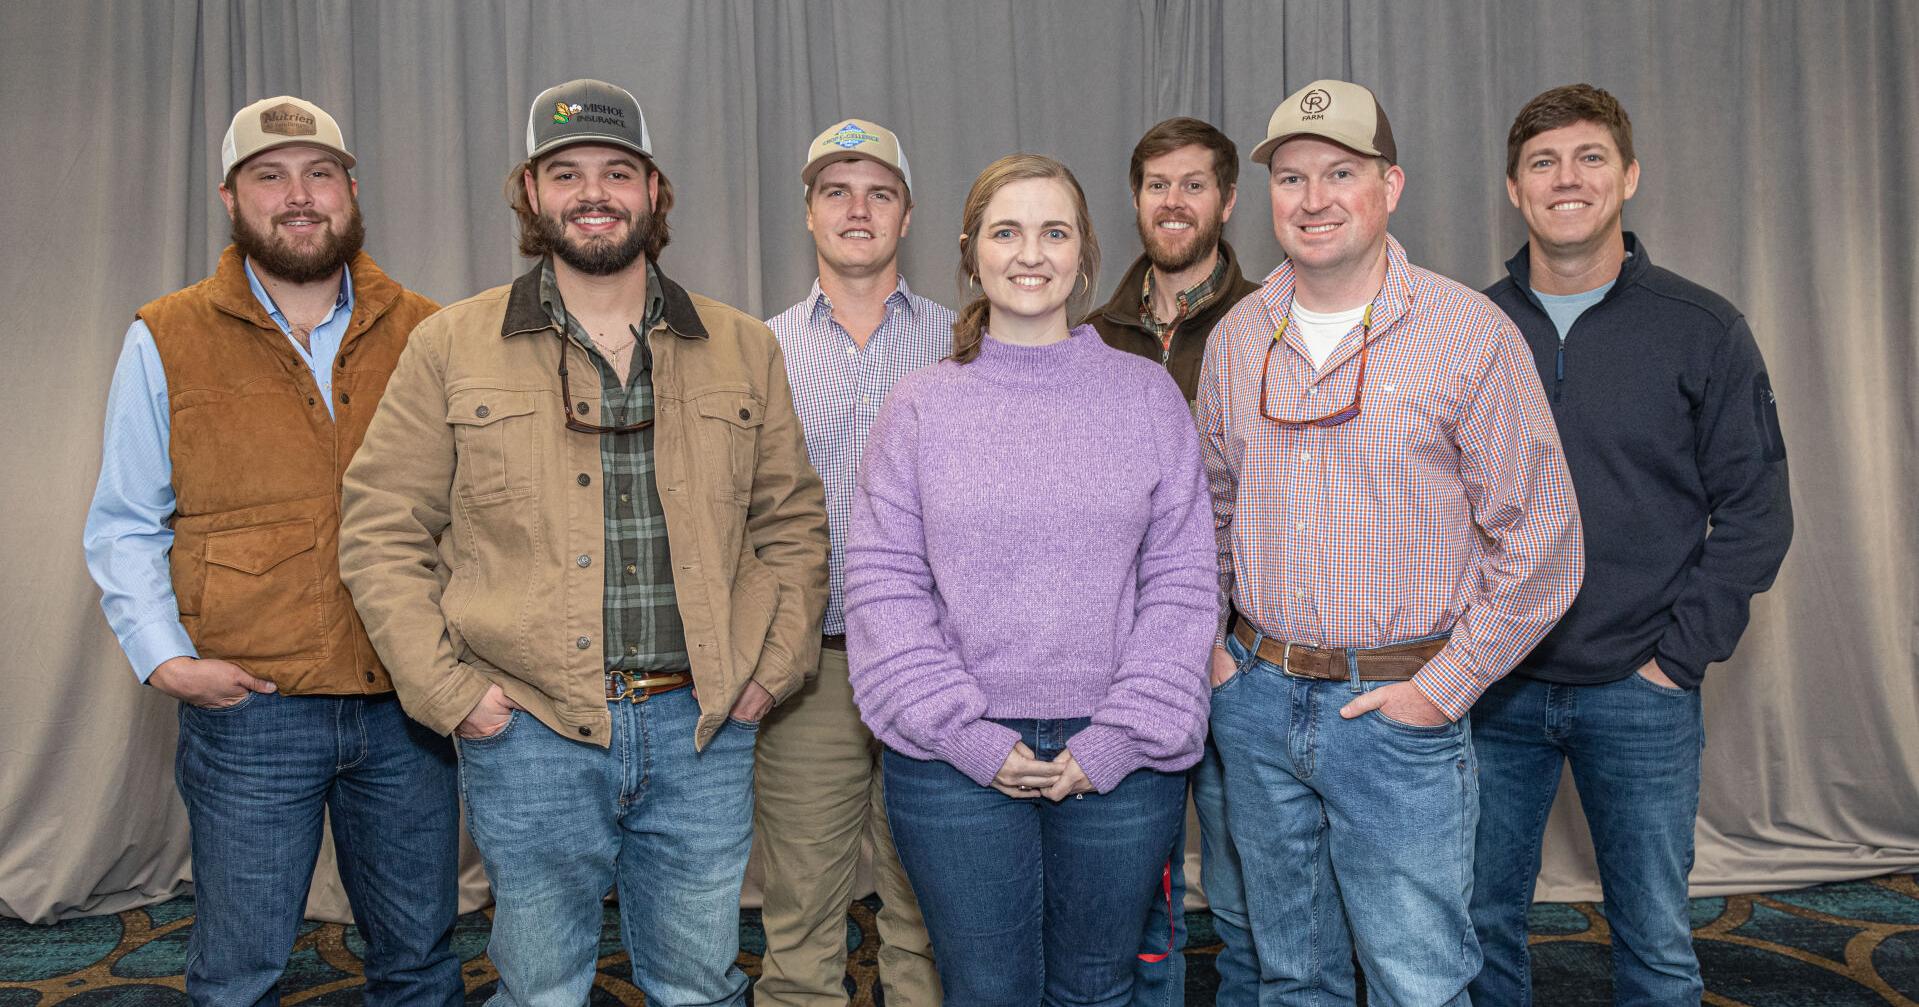 South Carolina Young Farmers Grow as Leaders in Greenville